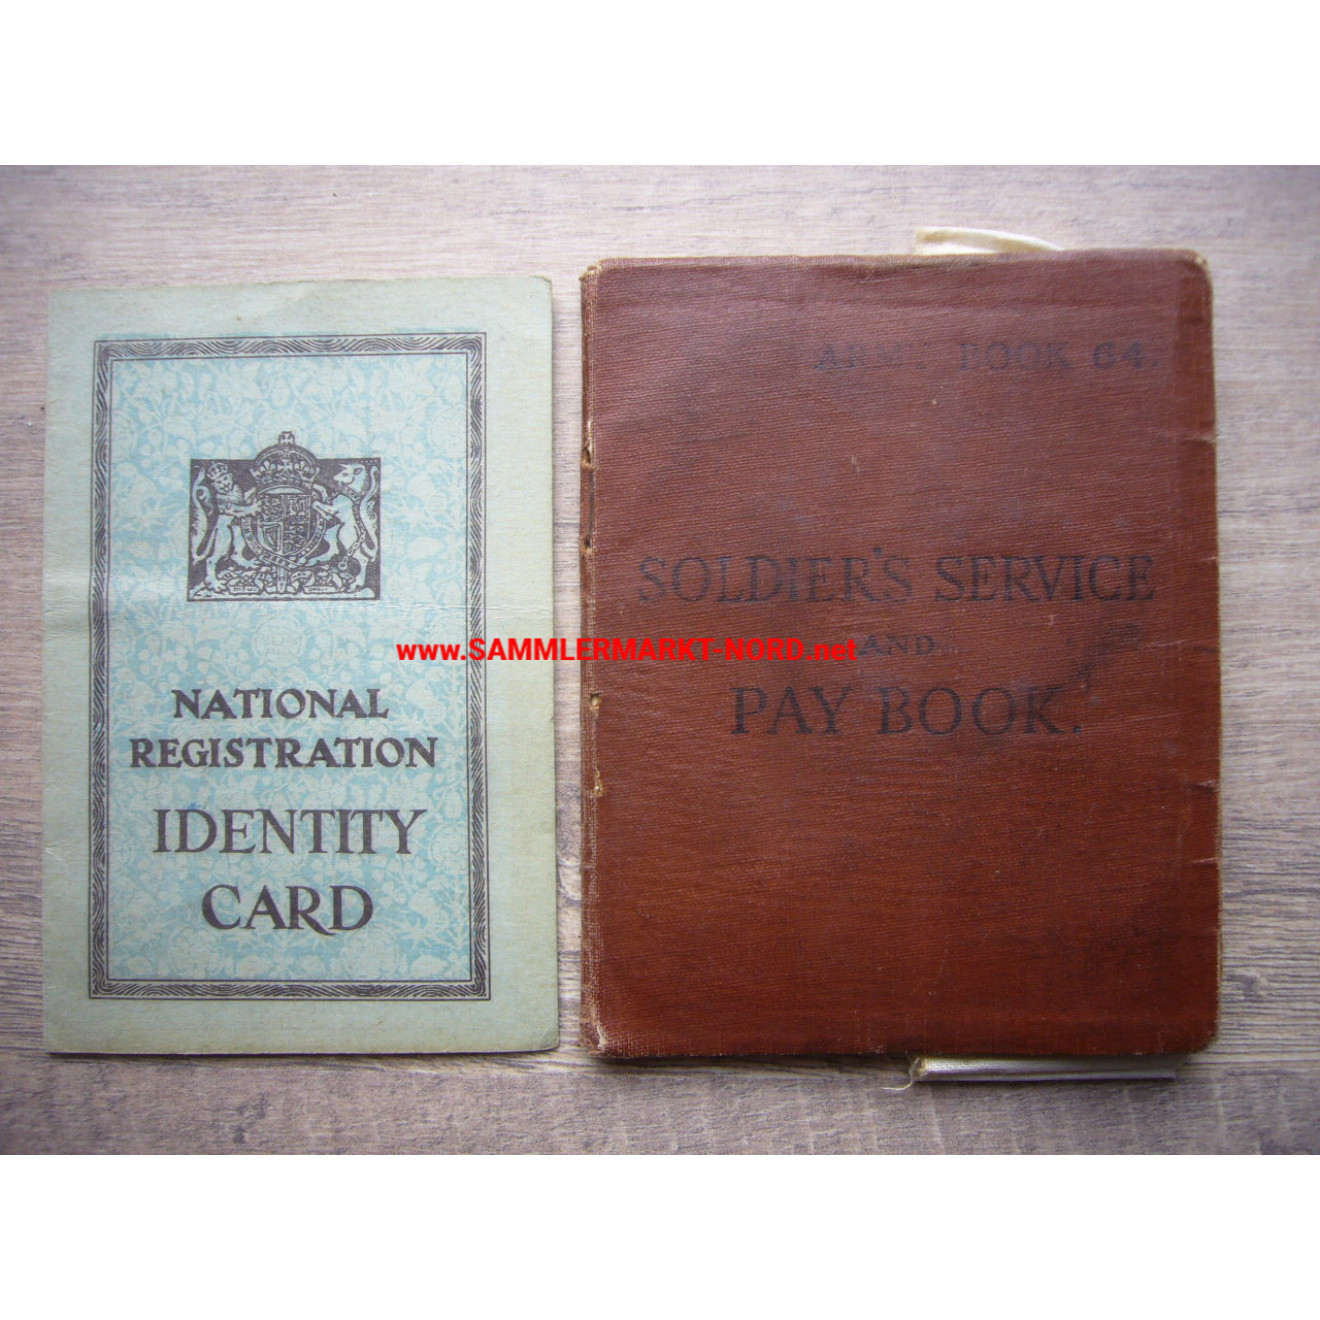 Great Britain - Pay book & ID card 1949/51